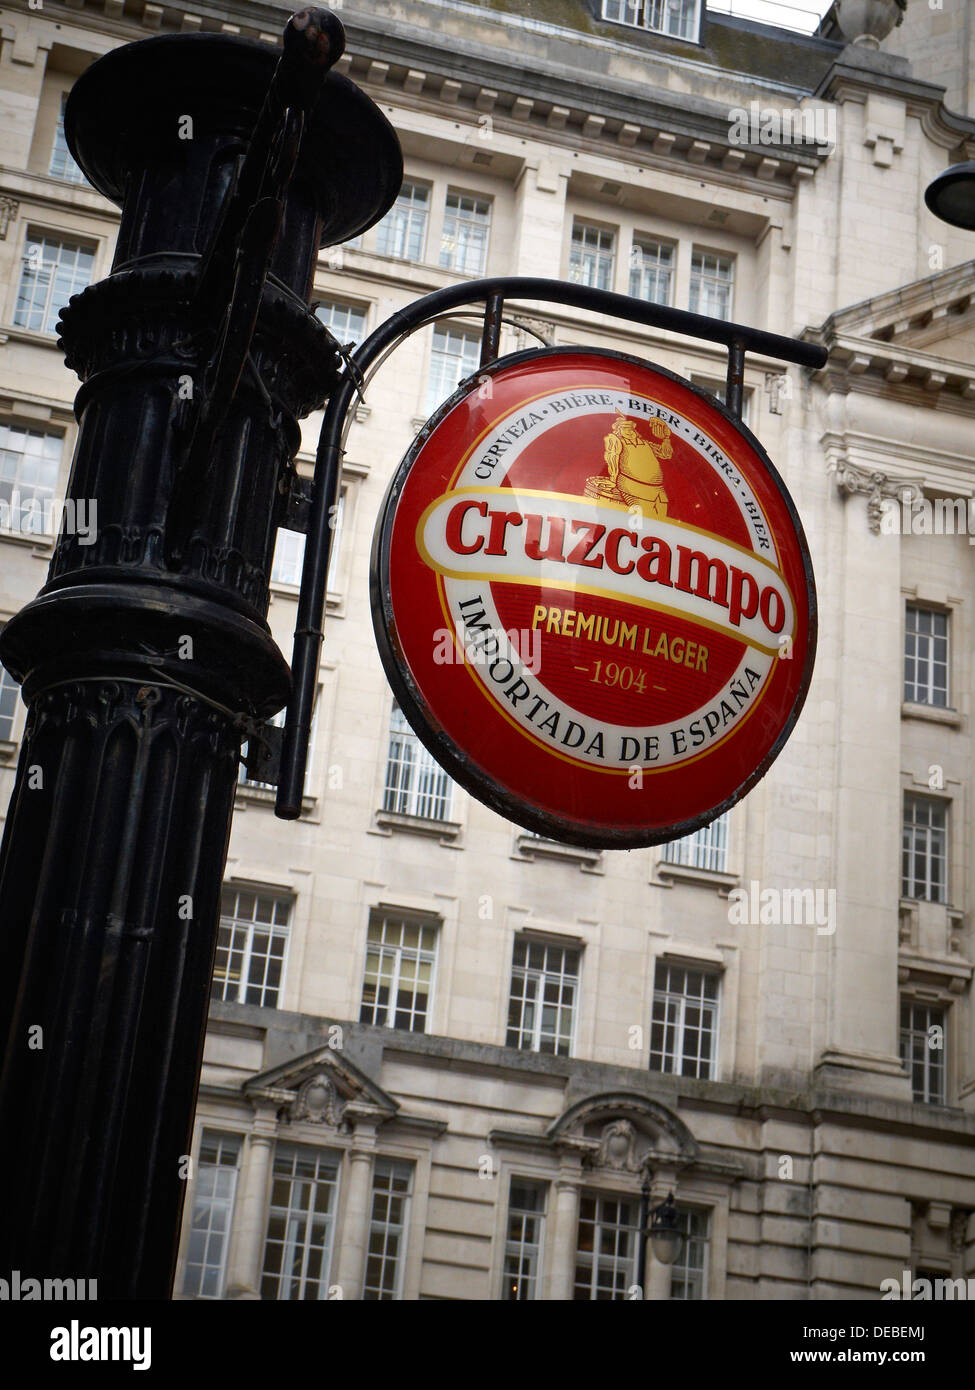 Cruzcampo Spanish beer sign in Manchester UK Stock Photo